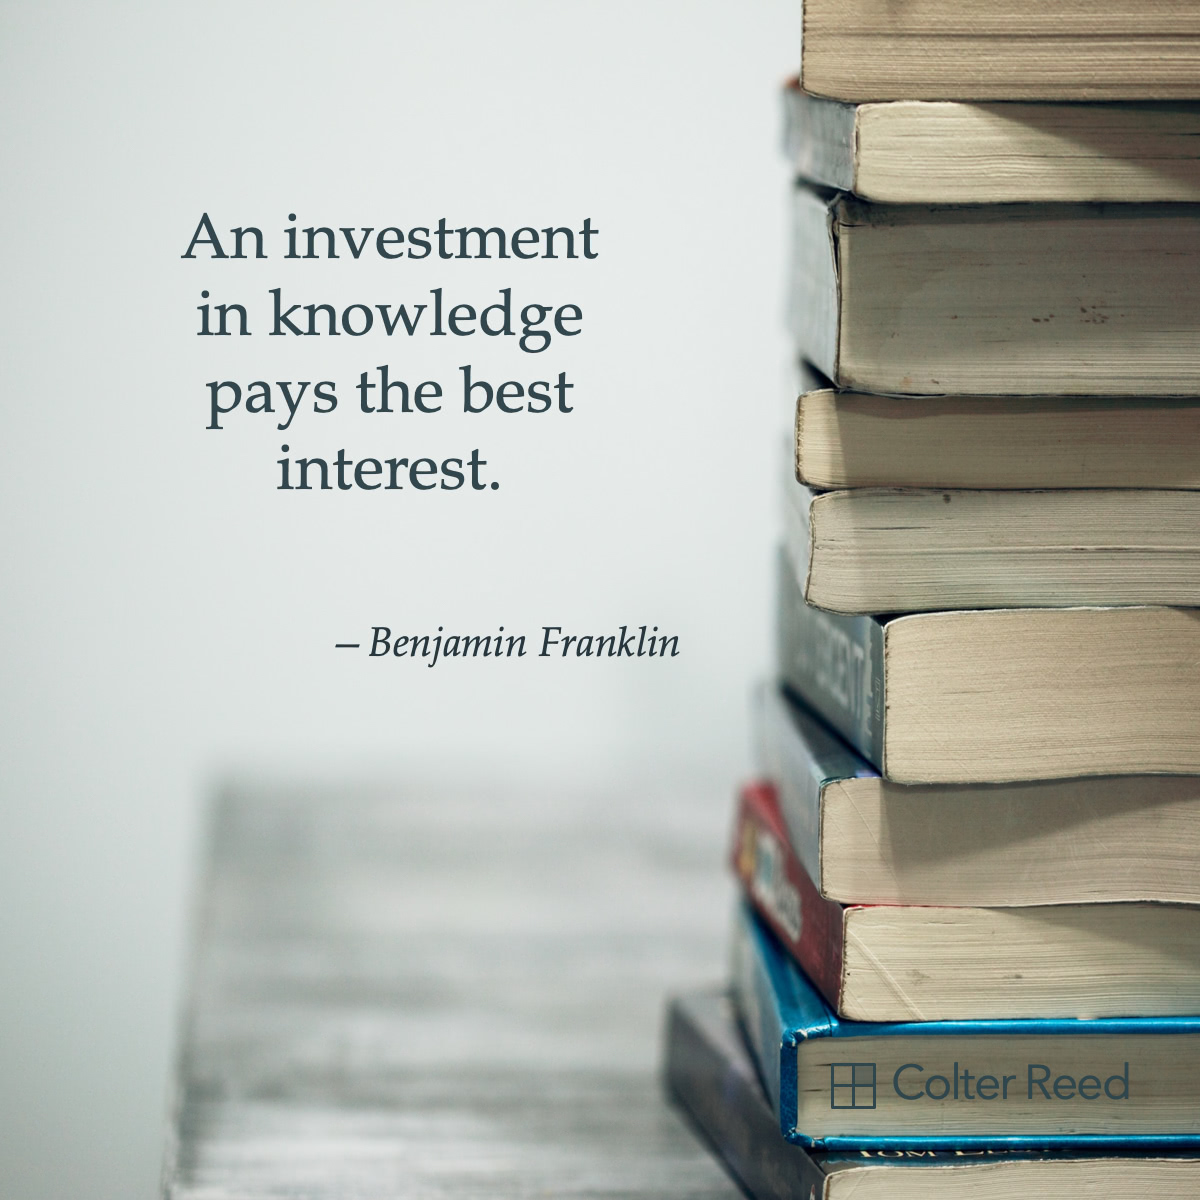 essay on an investment in knowledge pays the best interest